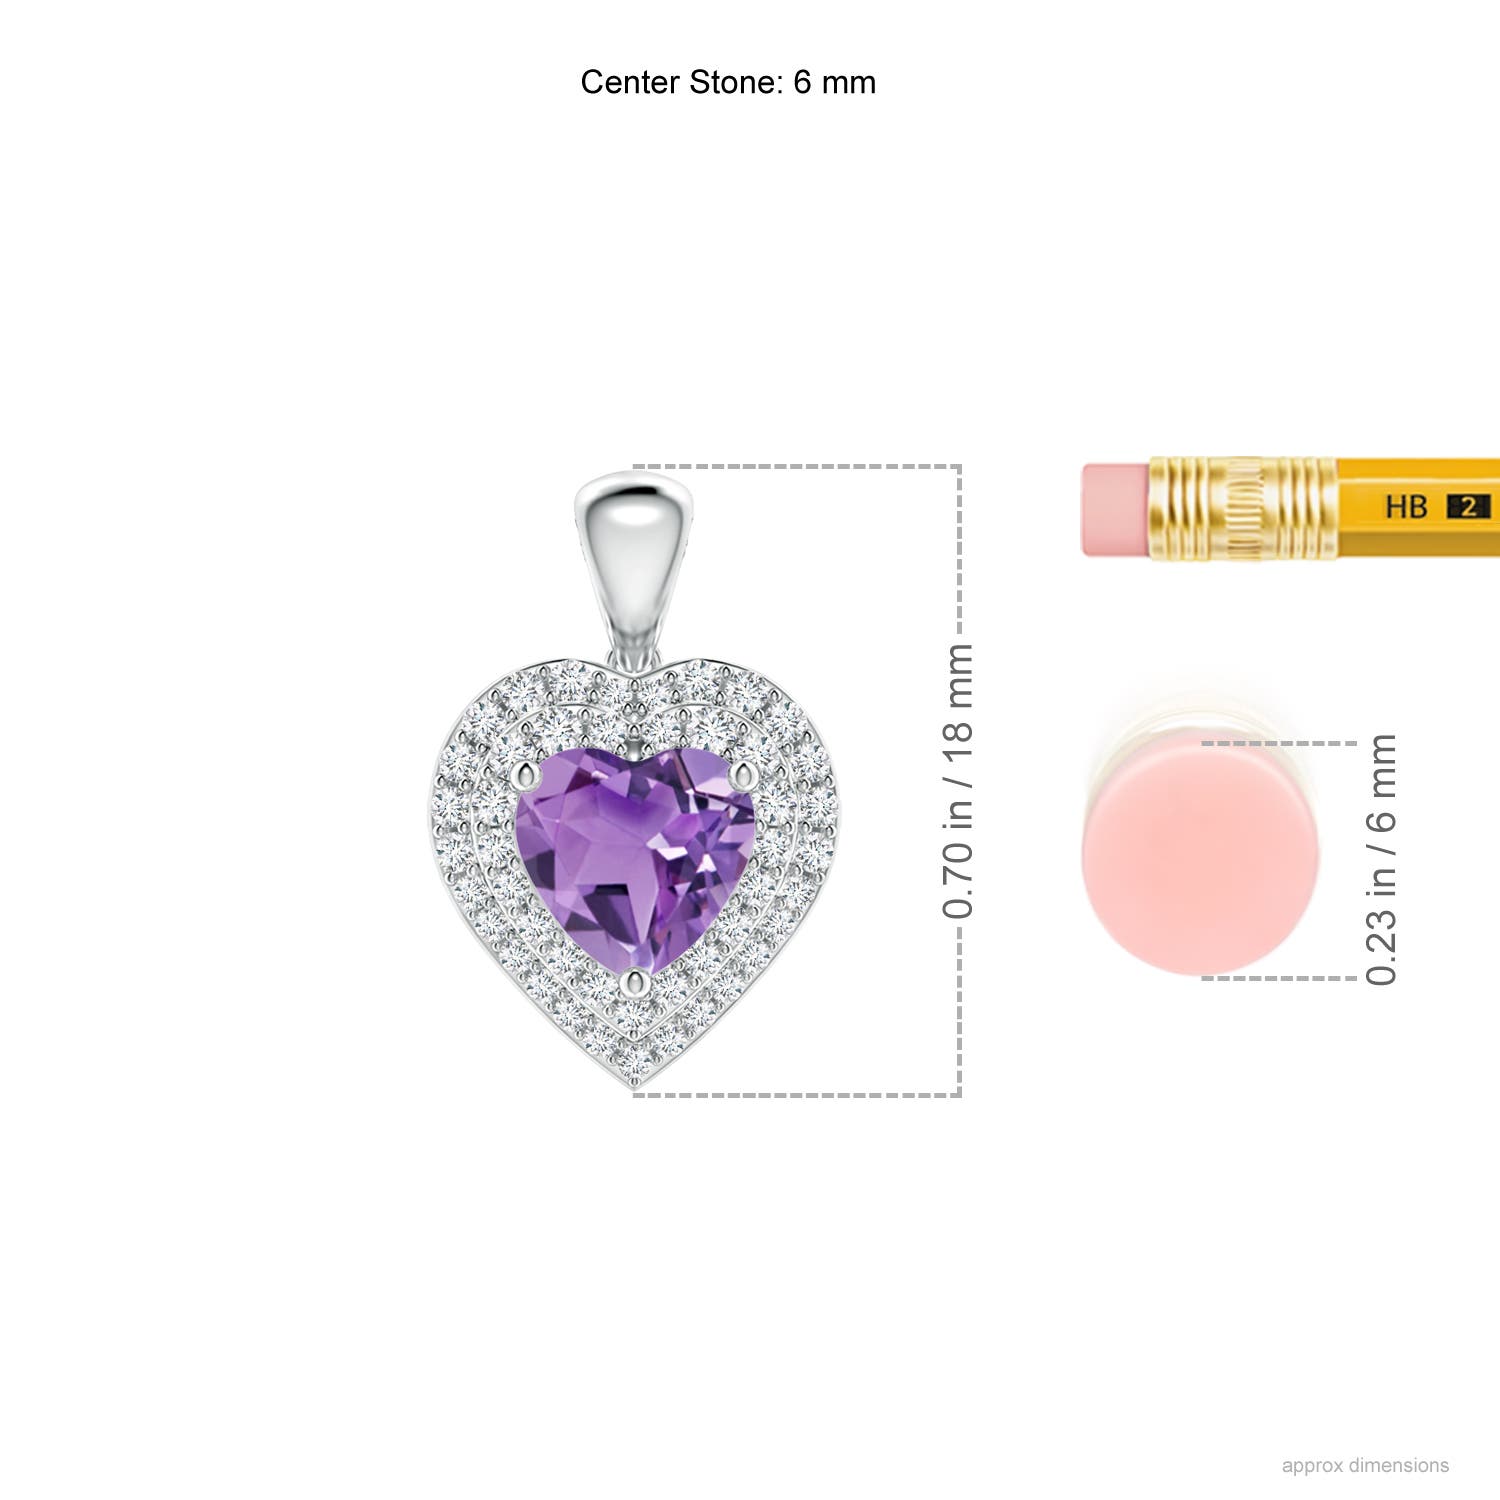 A - Amethyst / 1.15 CT / 14 KT White Gold